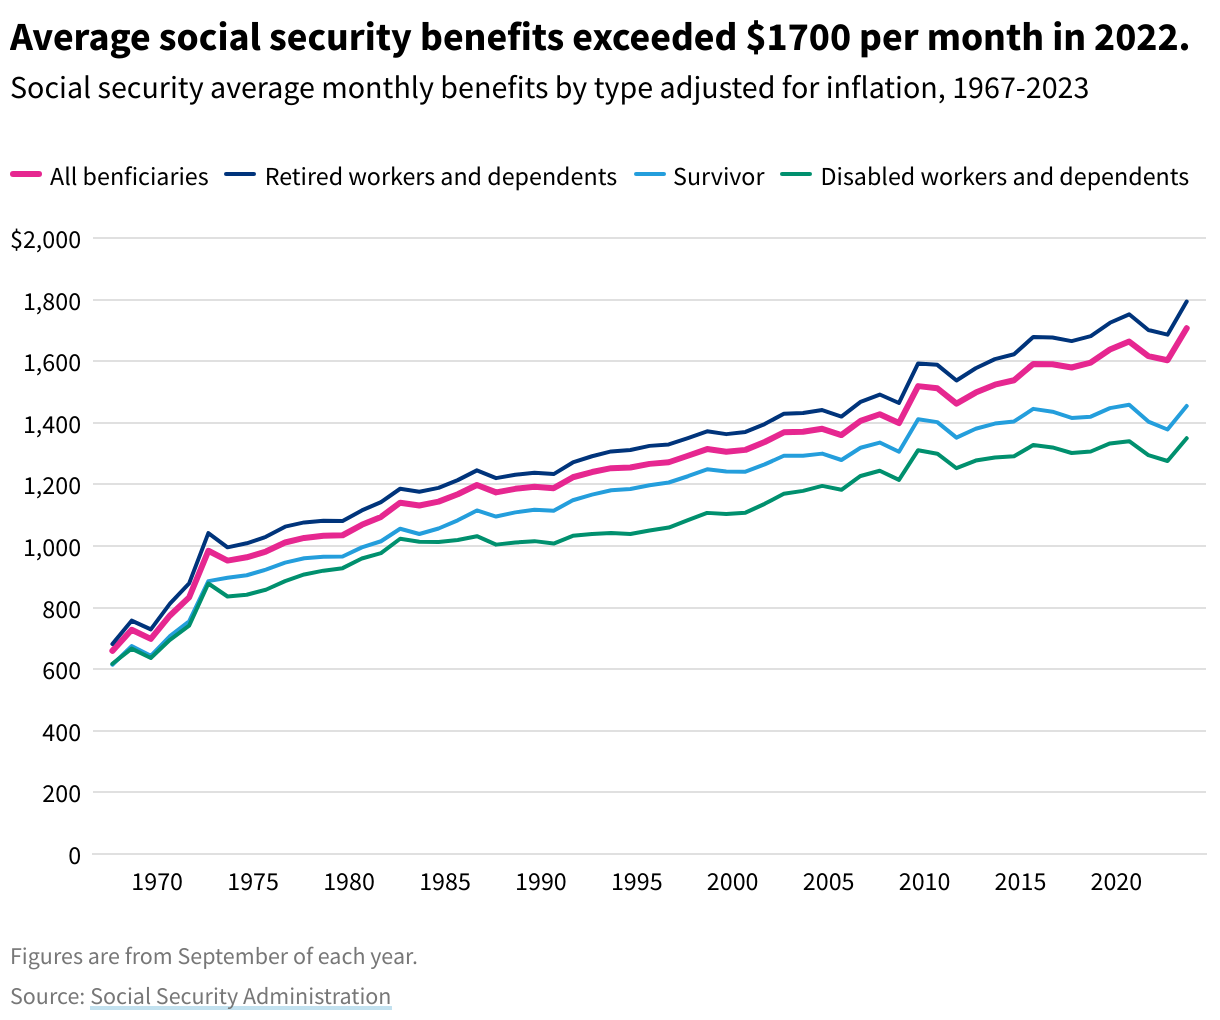 Line graph comparing average social security monthly benefits by type. The types are all beneficiaries, retired workers and dependents, survivors, disabled workers and dependents. In 2022, average social security benefits exceeded $1700 per month.